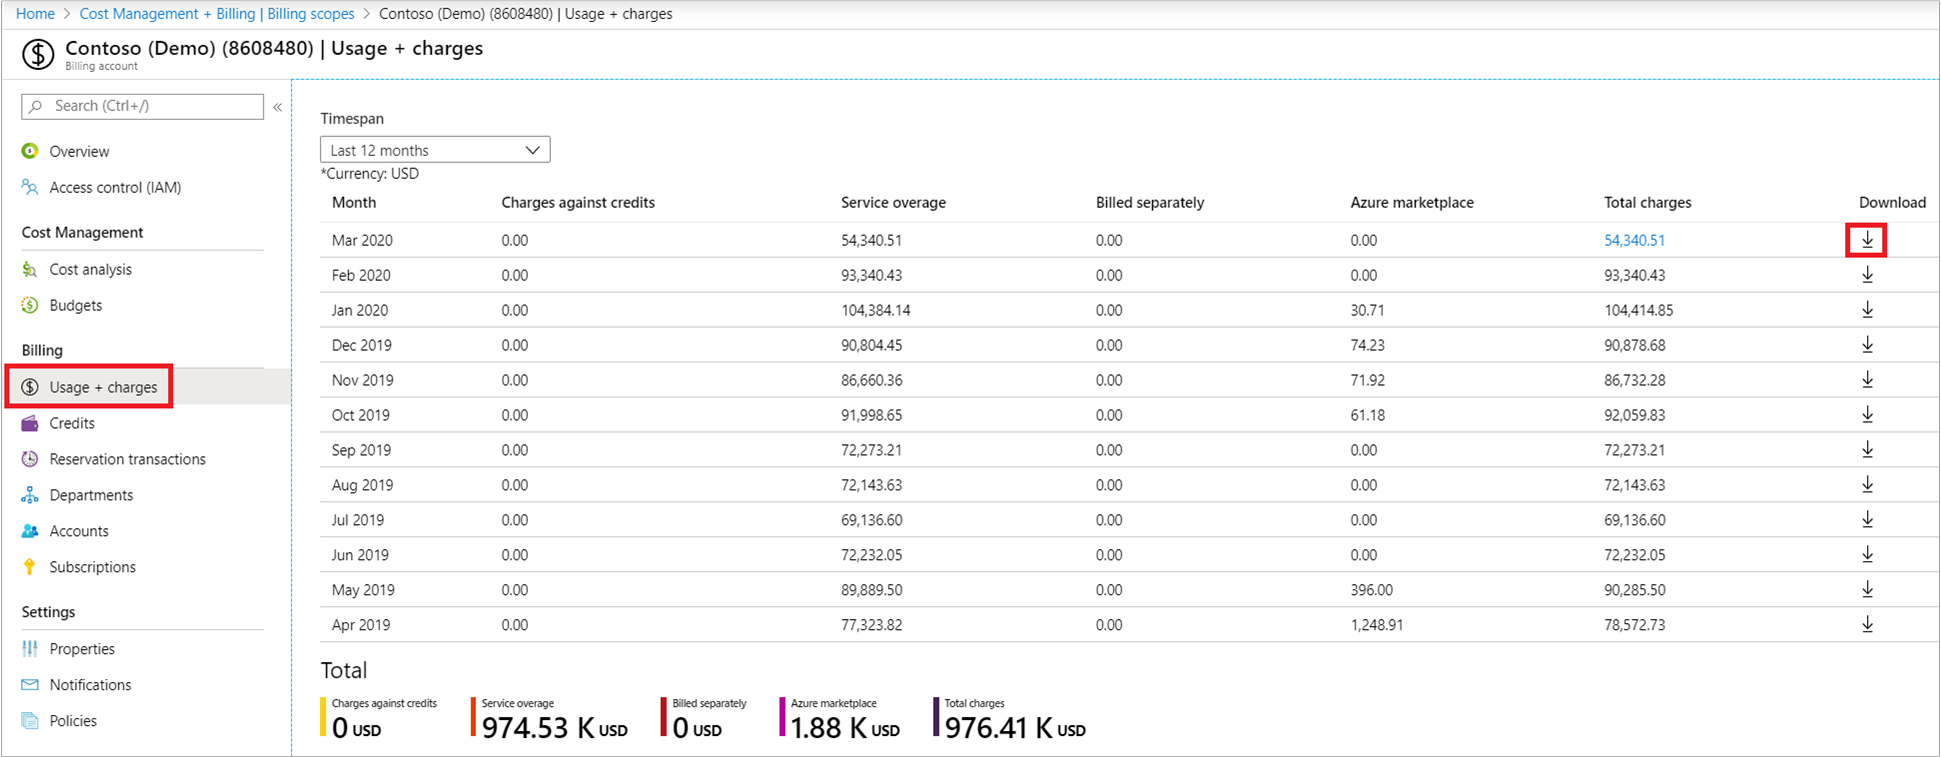 Screenshot shows the Cost Management + Billing Invoices page for E A customers.